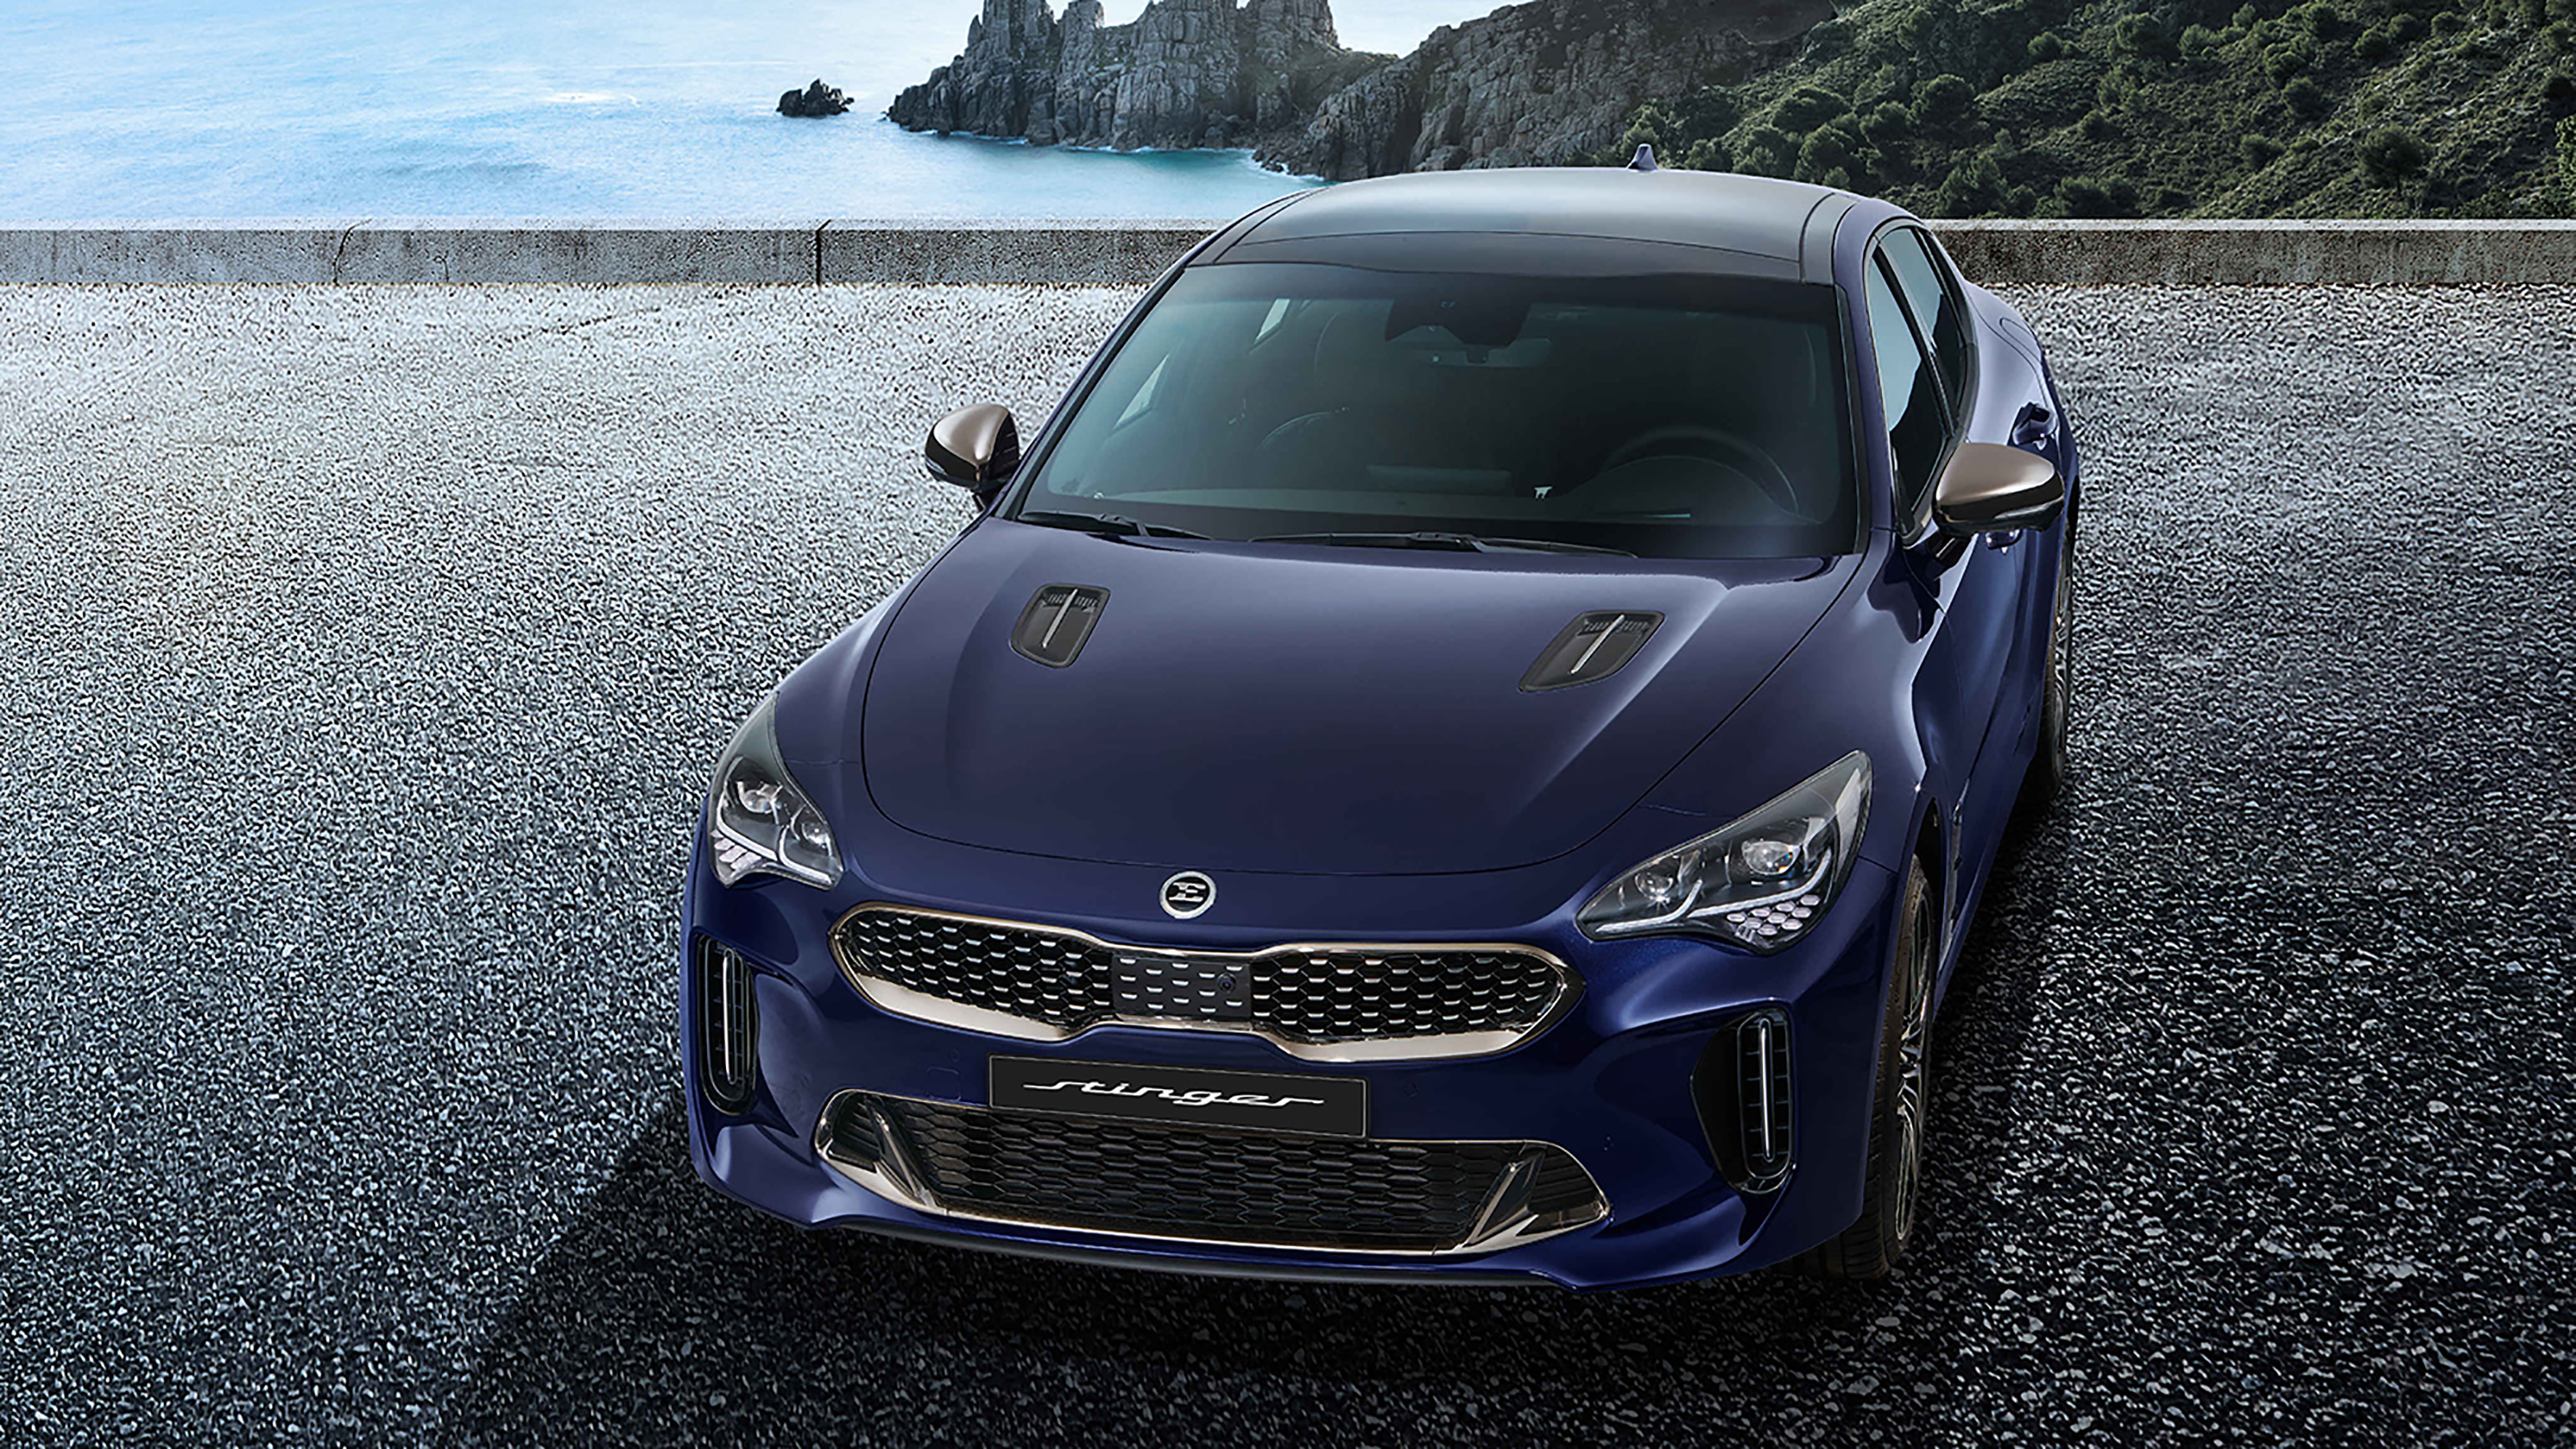 New 2021 Kia Stinger facelift revealed with new look and 